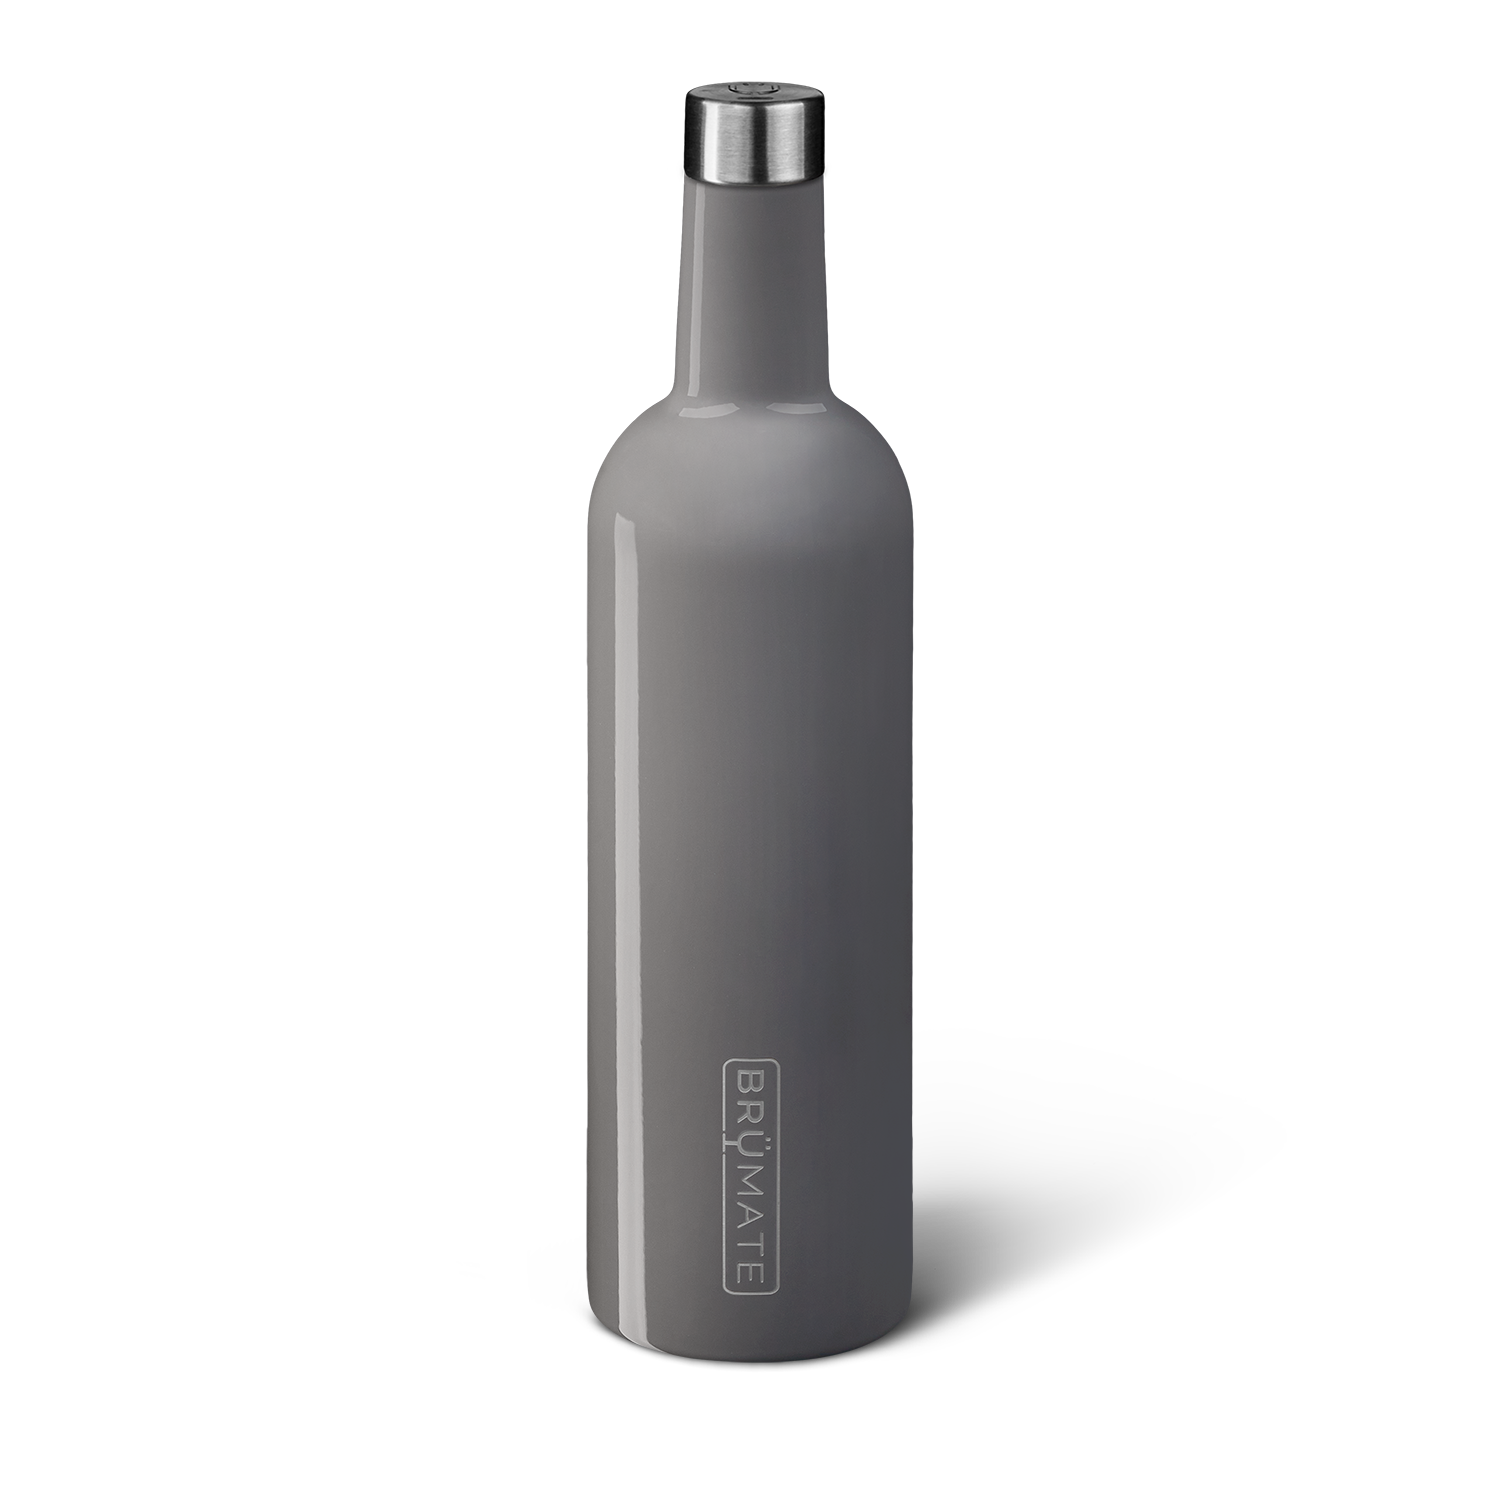 https://cdn.shopify.com/s/files/1/1114/2308/products/winesulator-charcoal-gray.png?v=1660191418